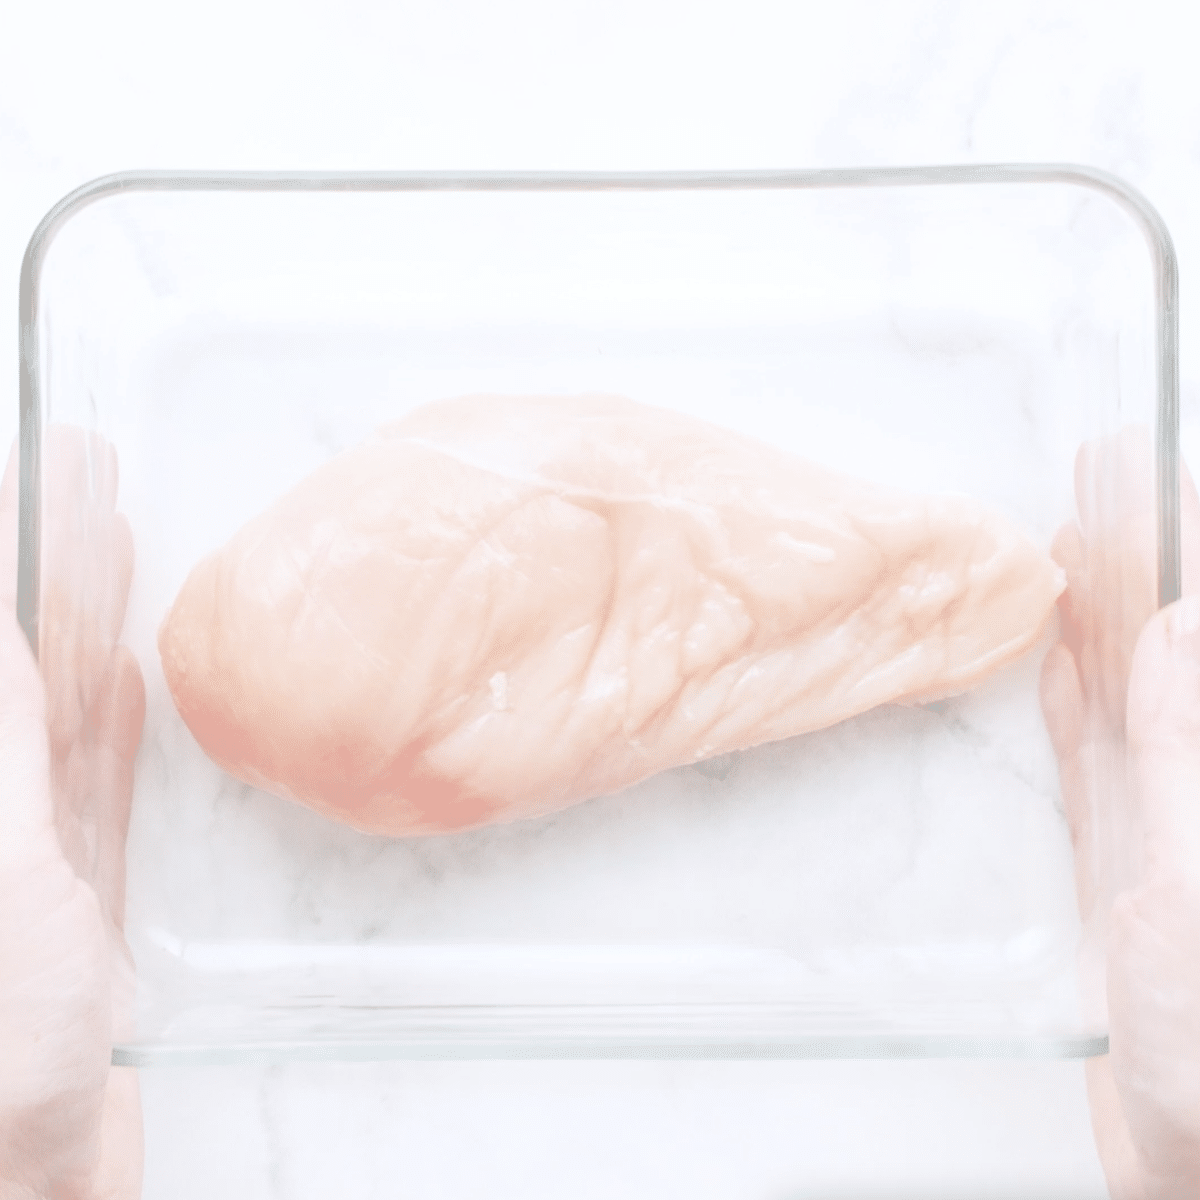 Hands holding a glass baking dish with raw chicken.